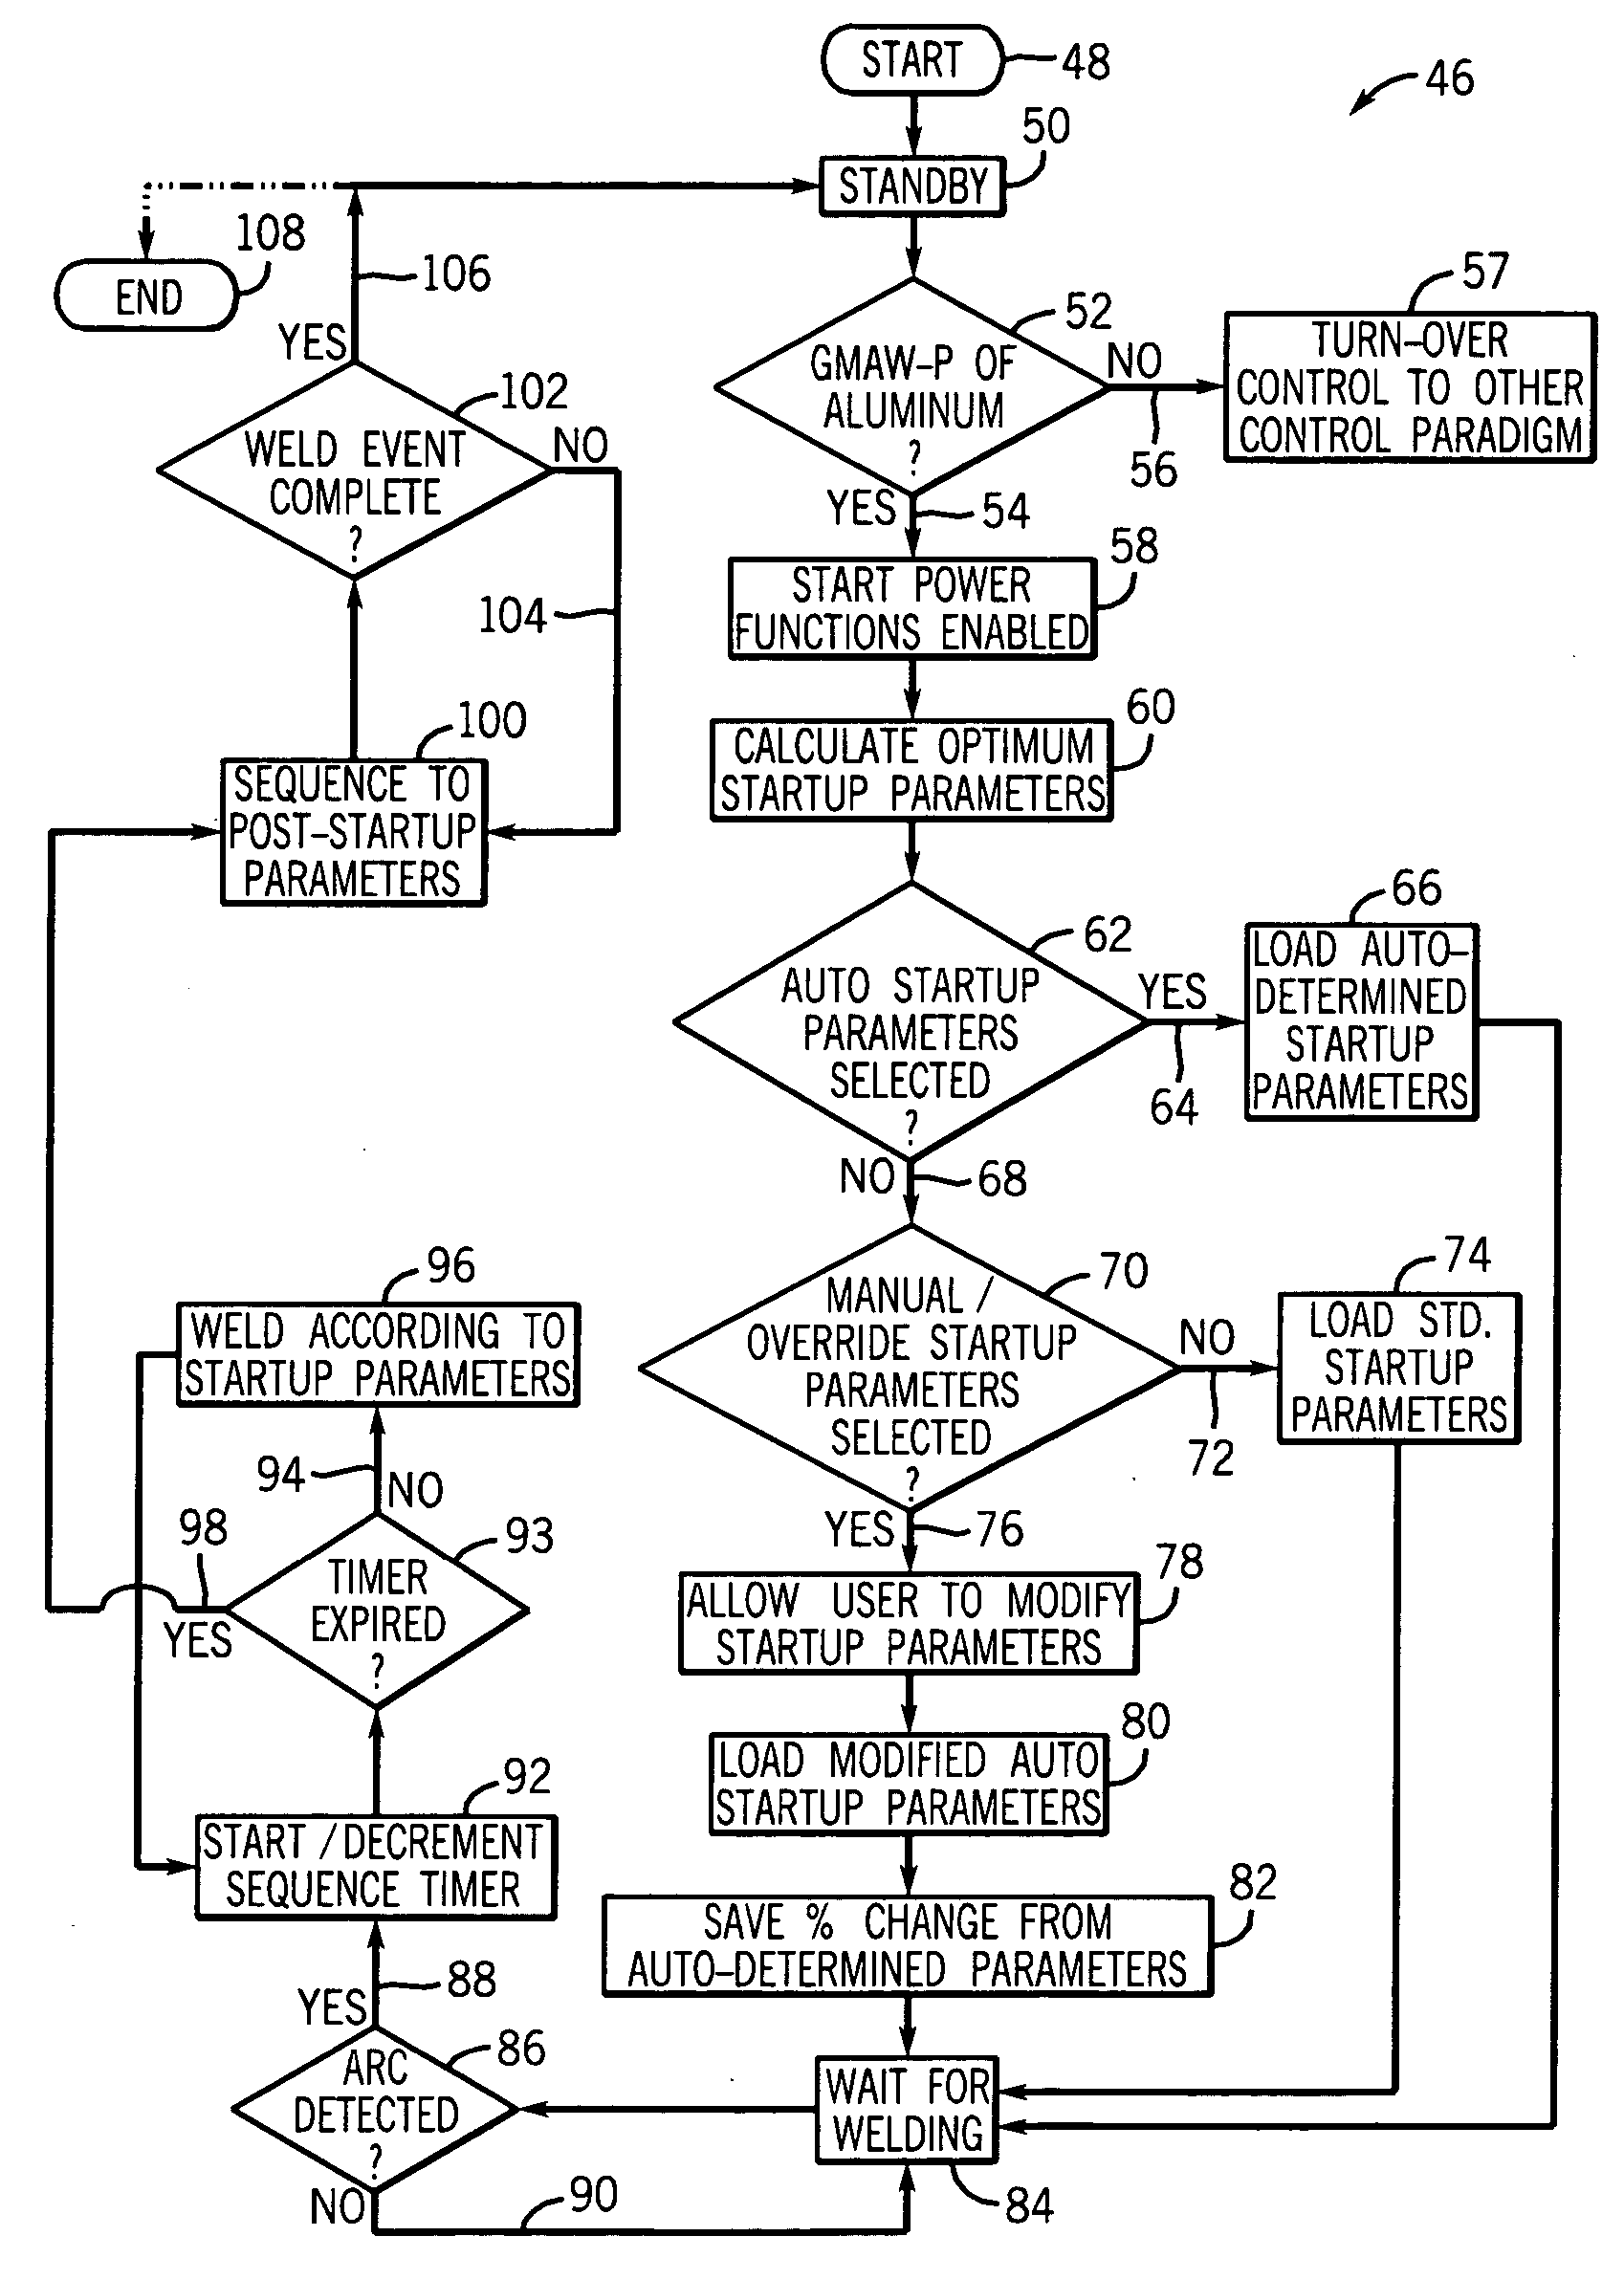 Method and system of welding with auto-determined startup parameters